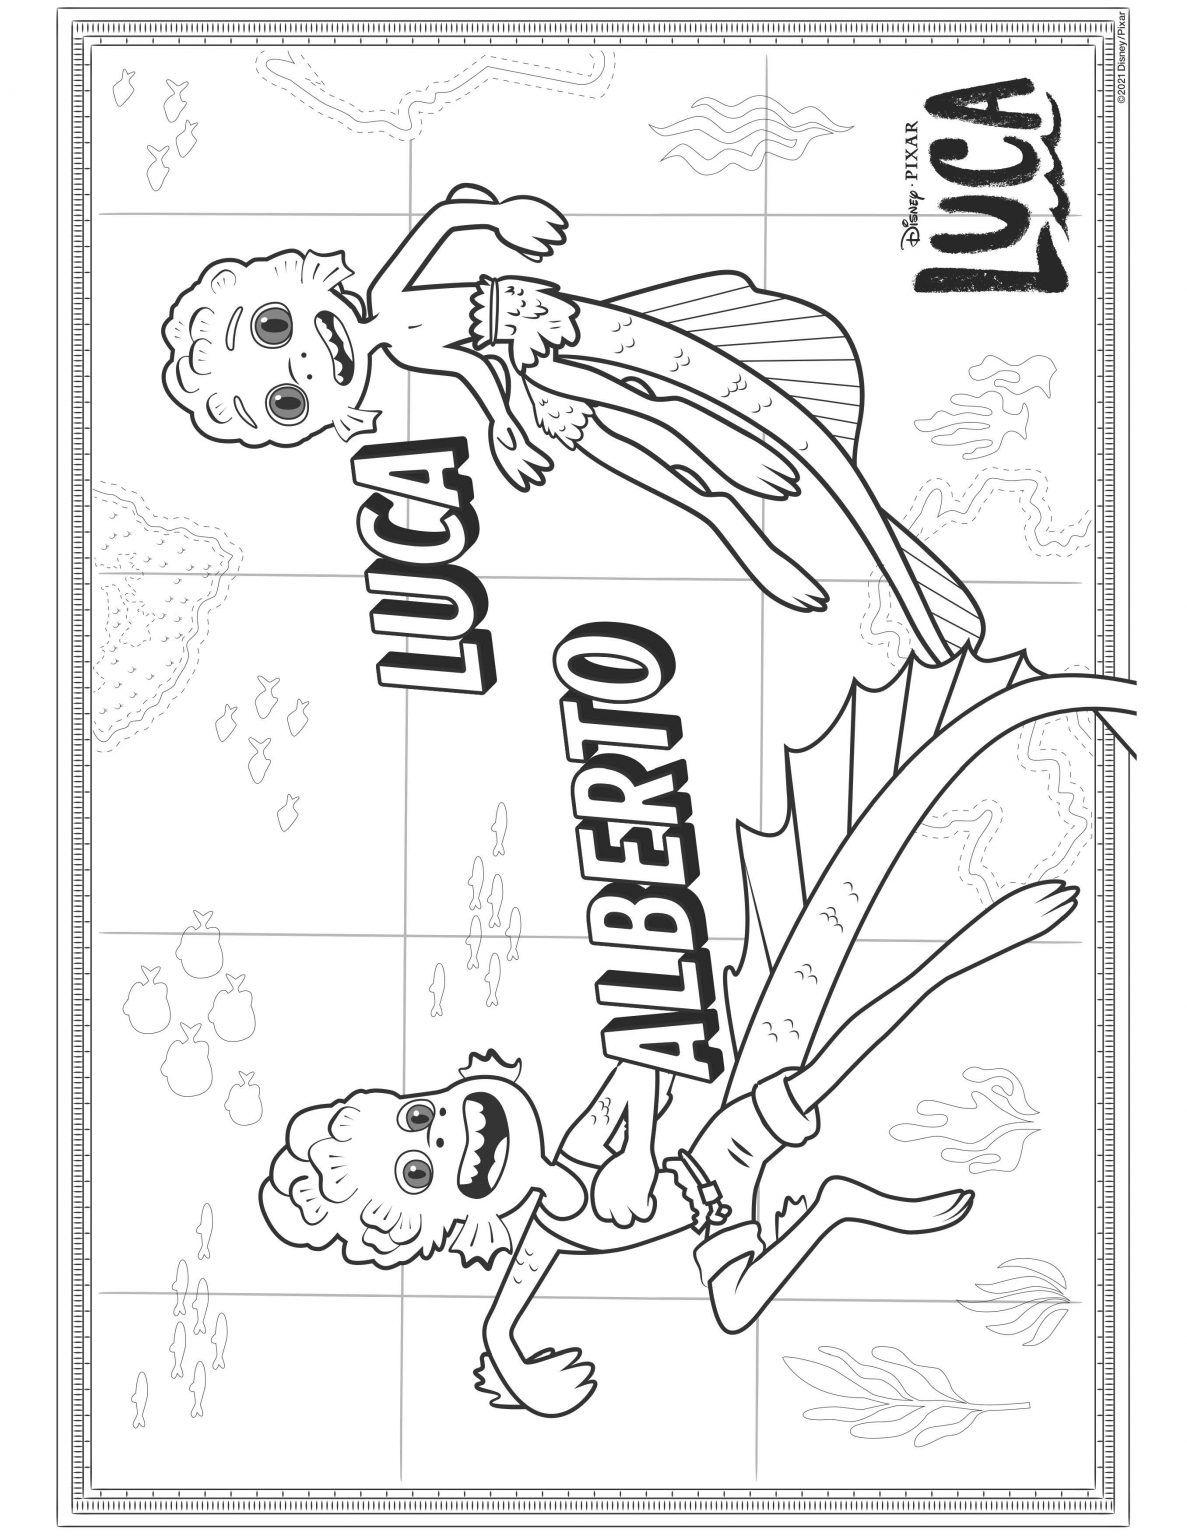 Luca coloring sheets